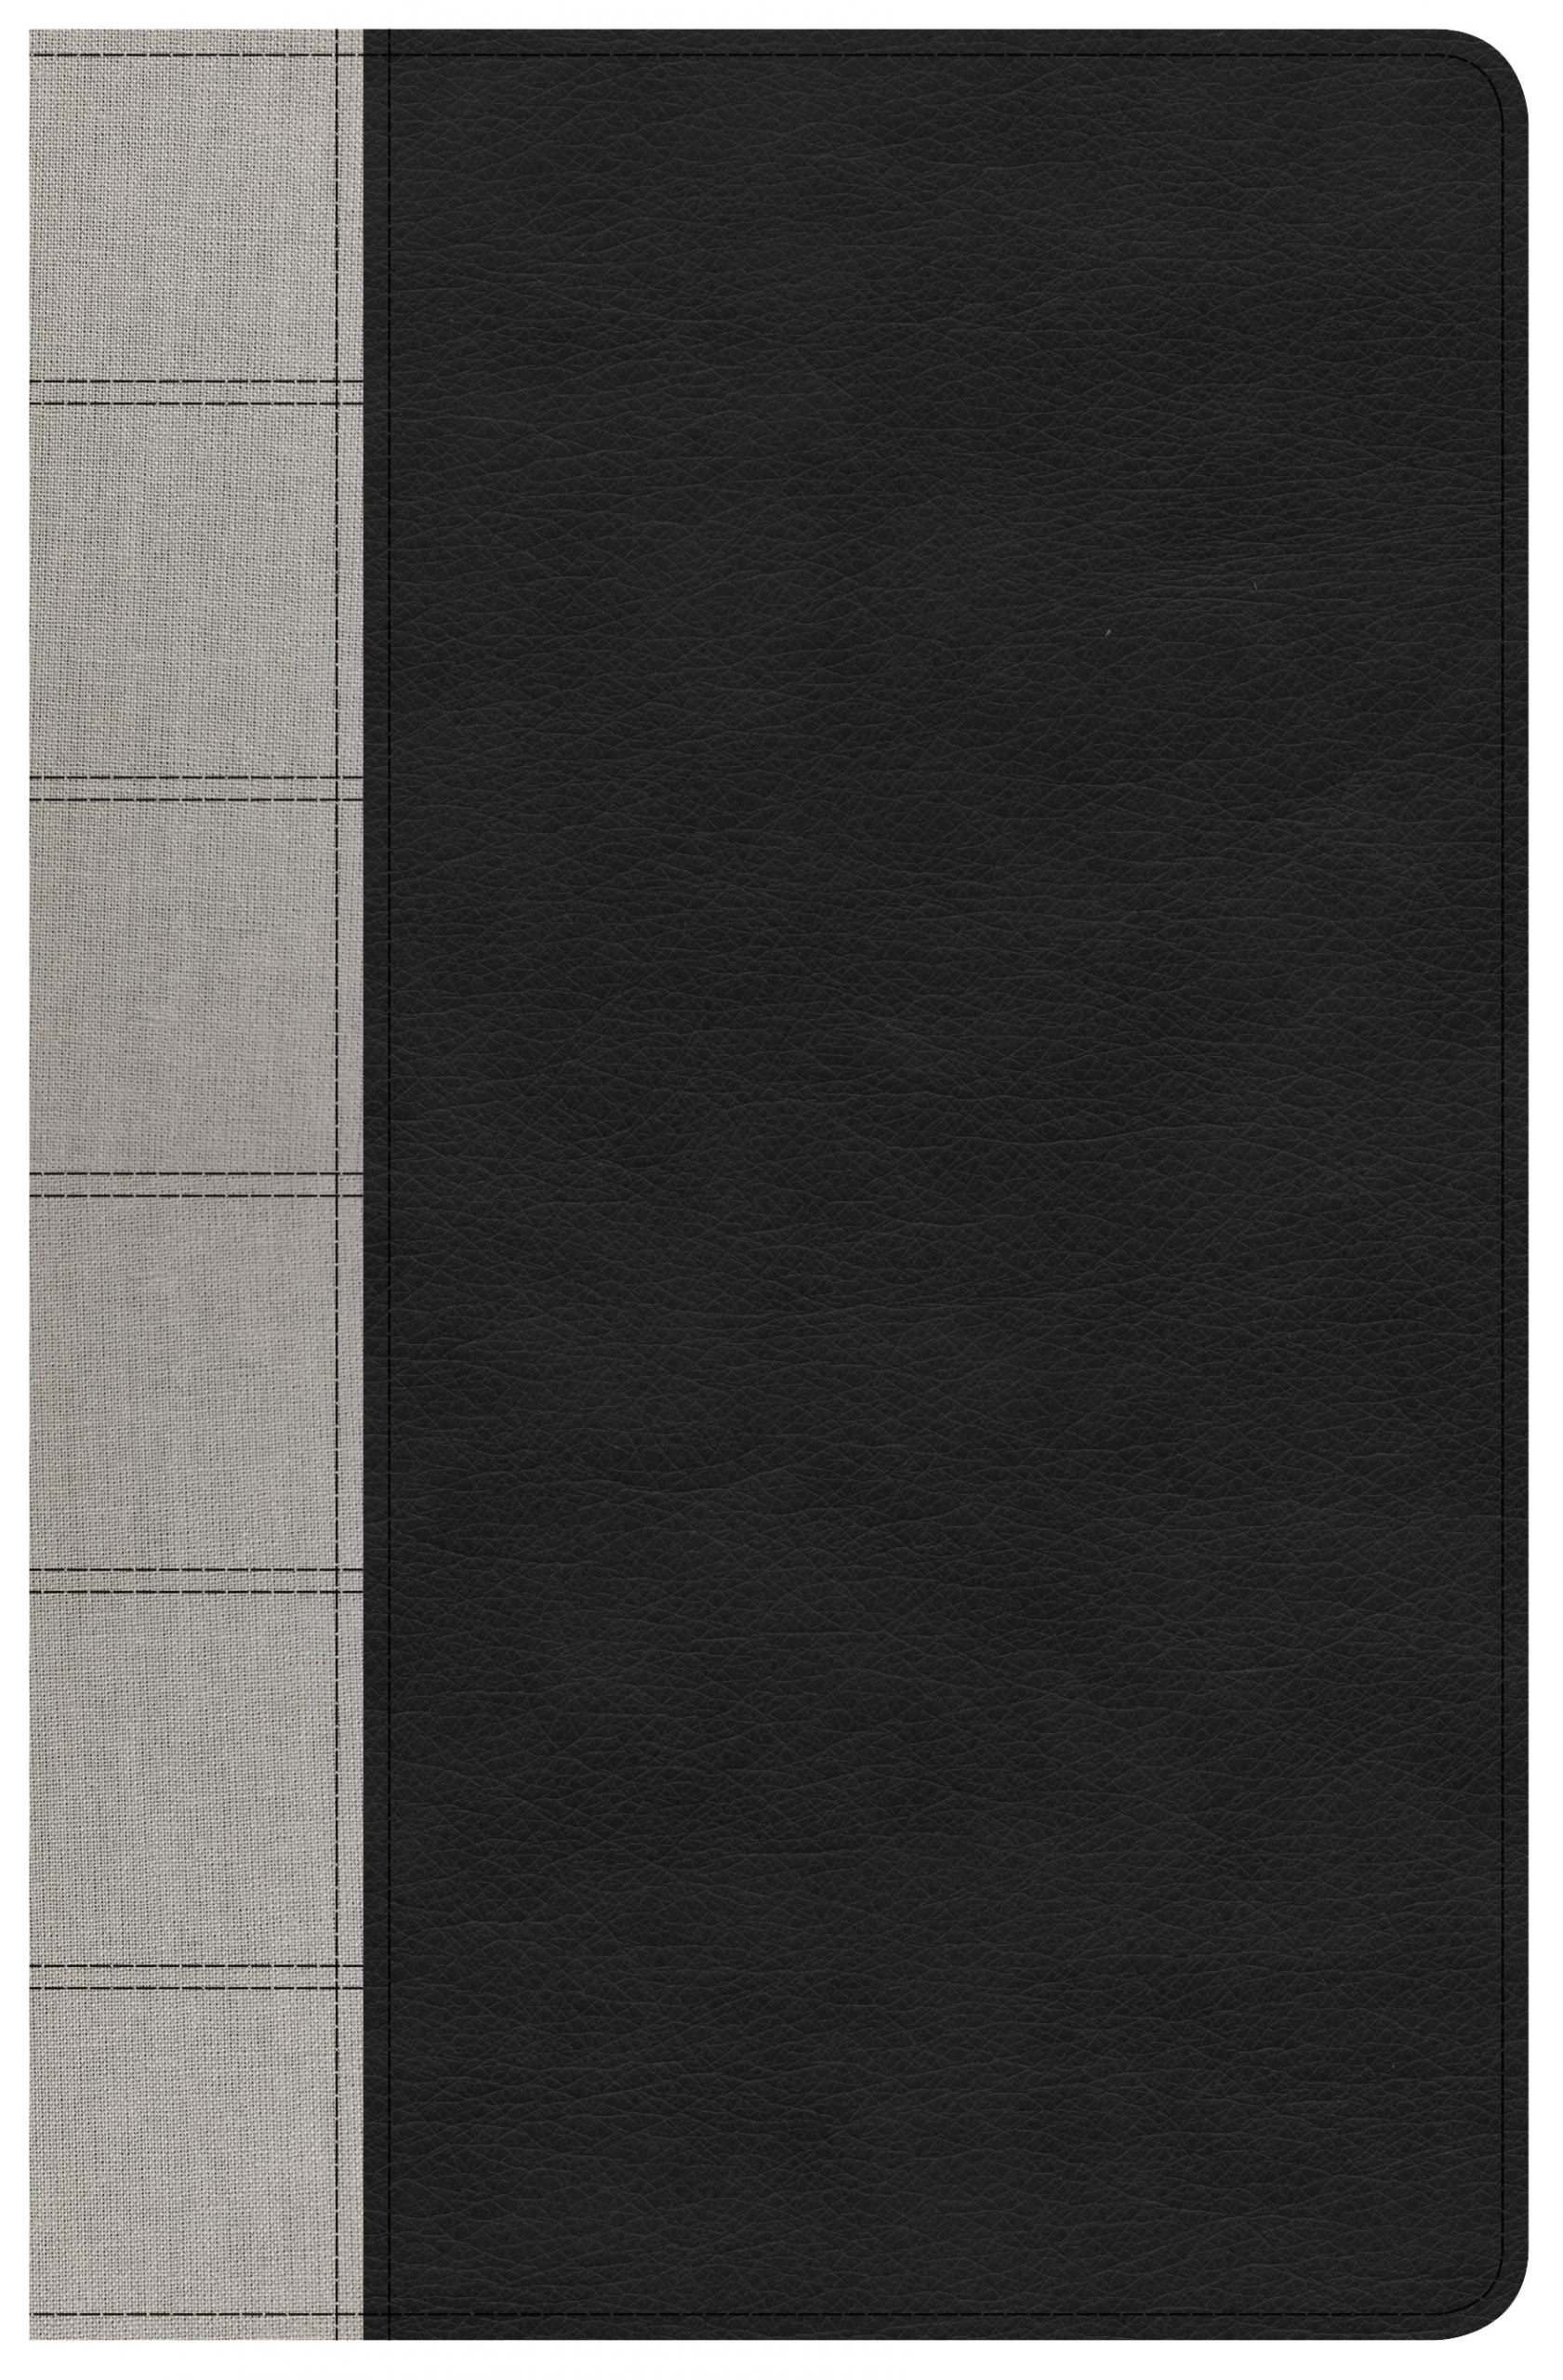 KJV Large Print Personal Size Reference Bible, Black/Gray Deluxe LeatherTouch, Indexed